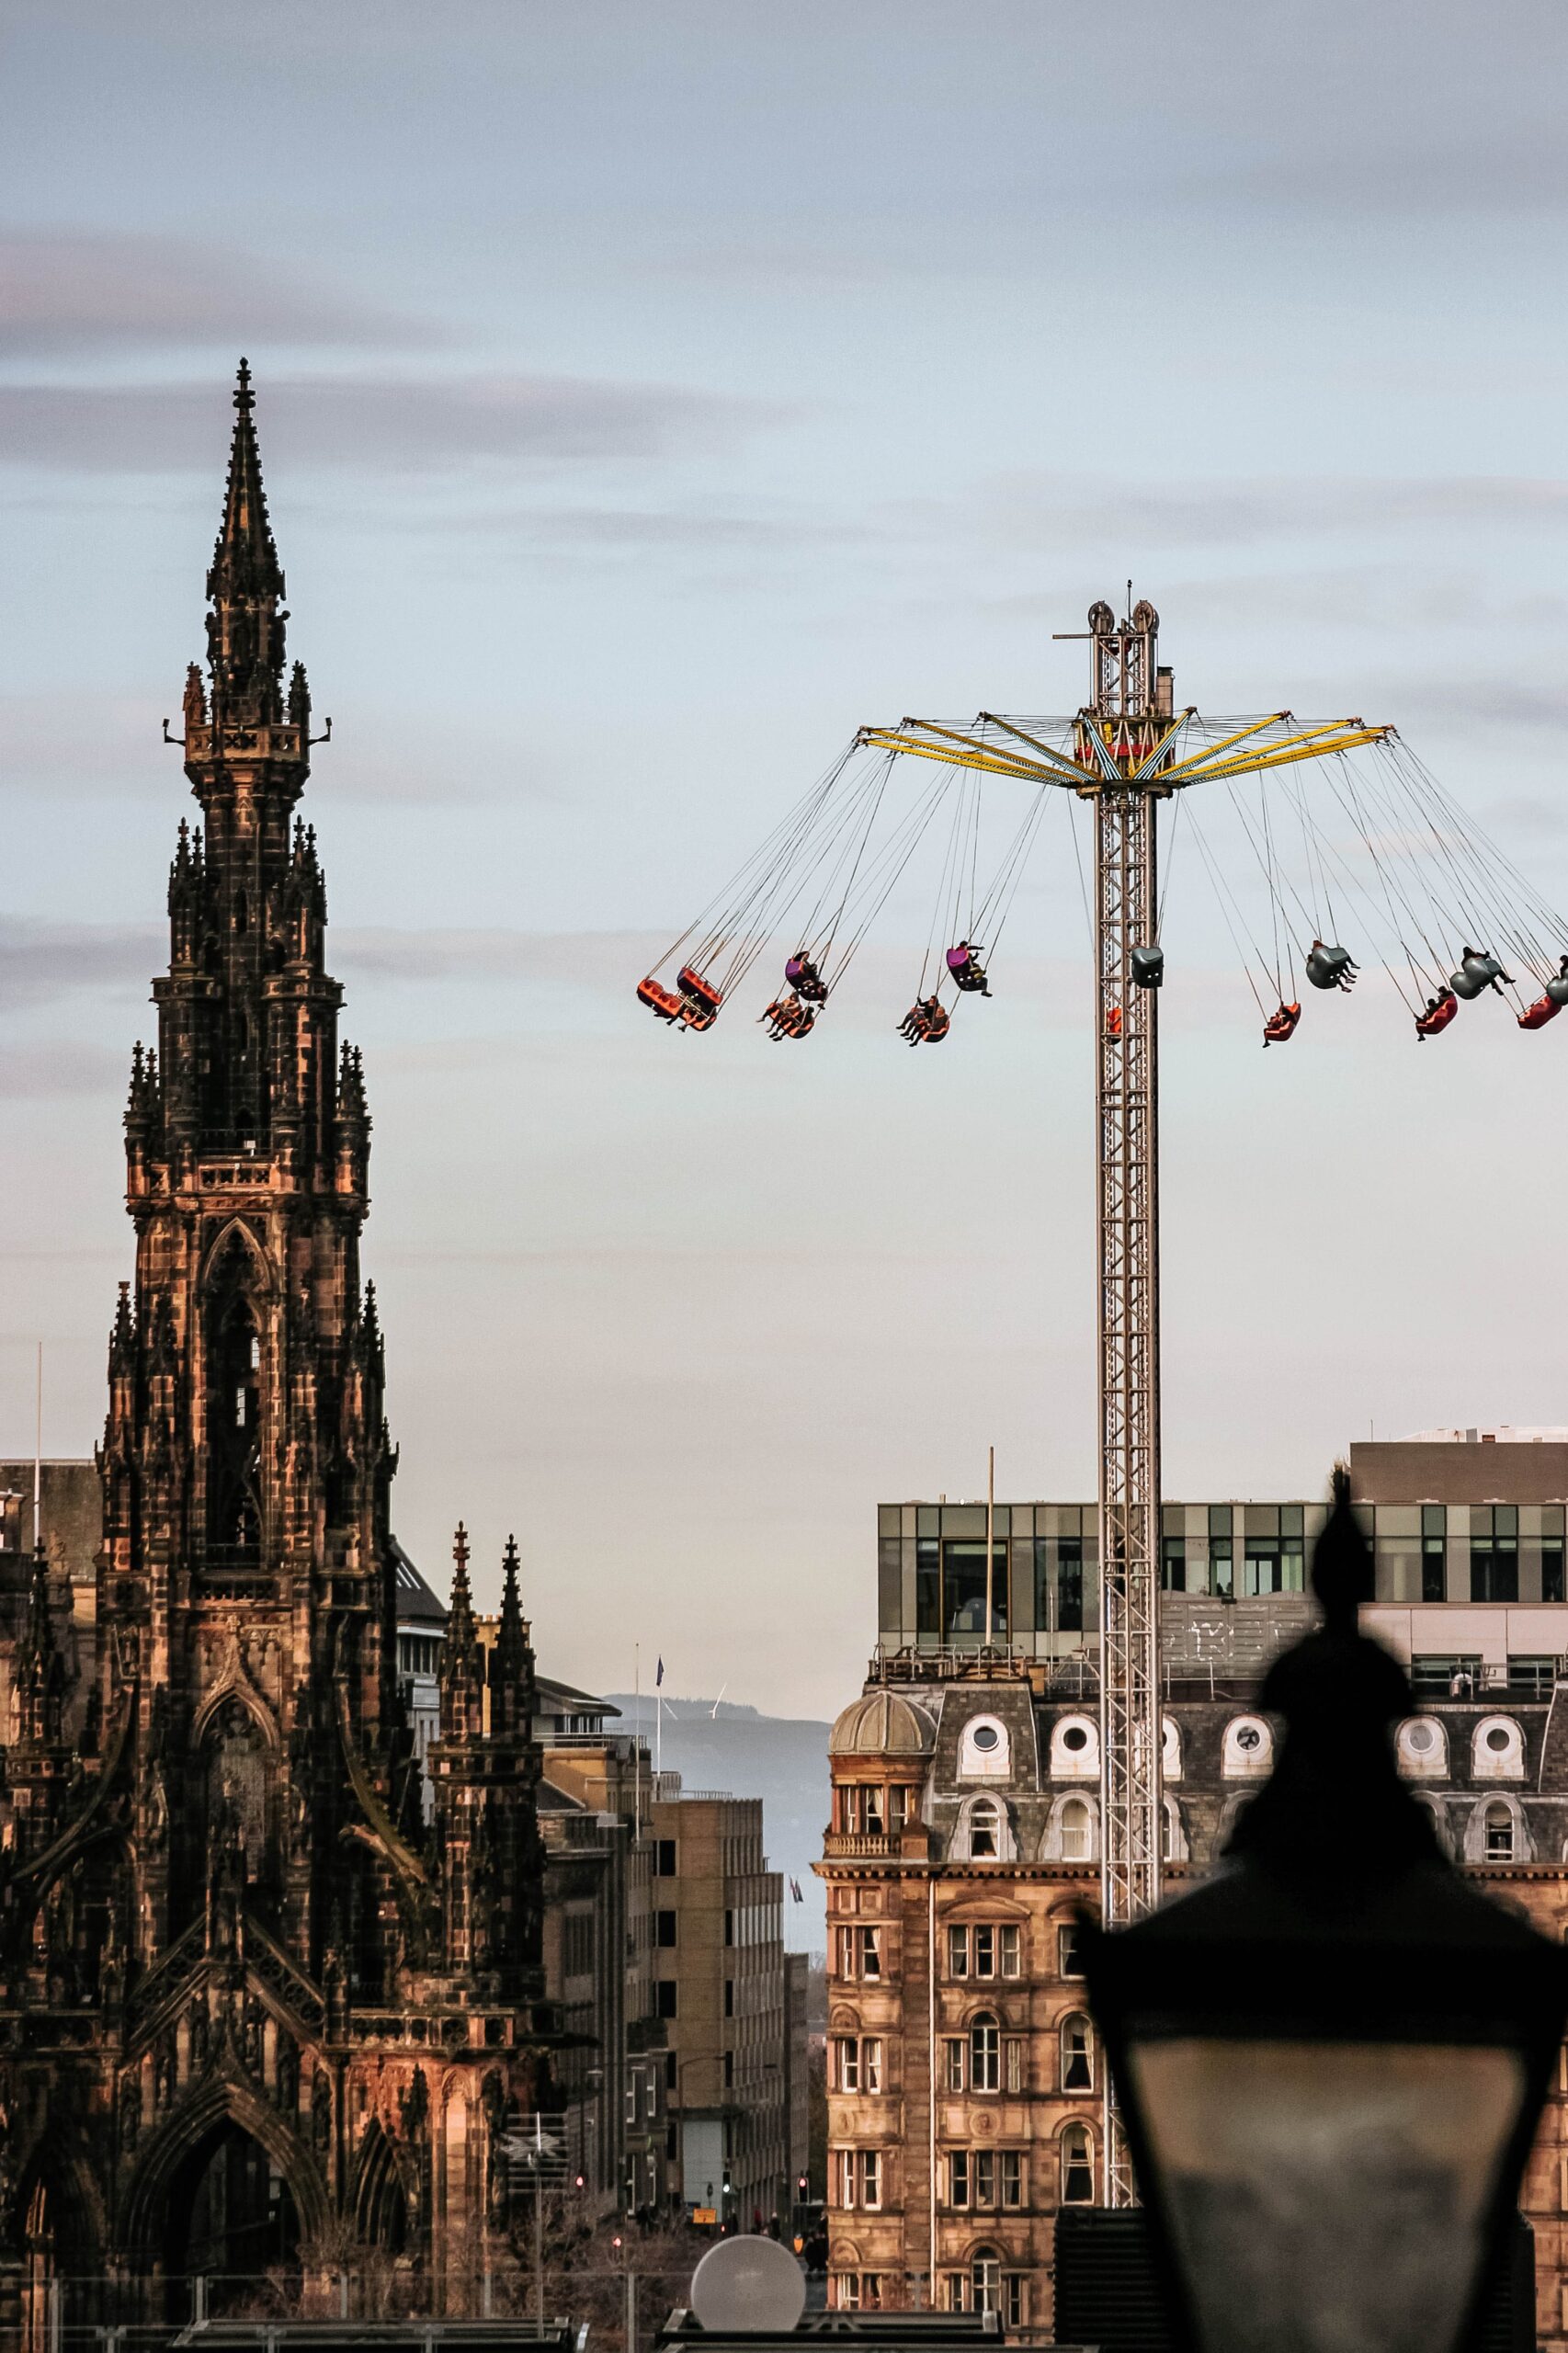 Edinburgh town steeple and spinny attraction